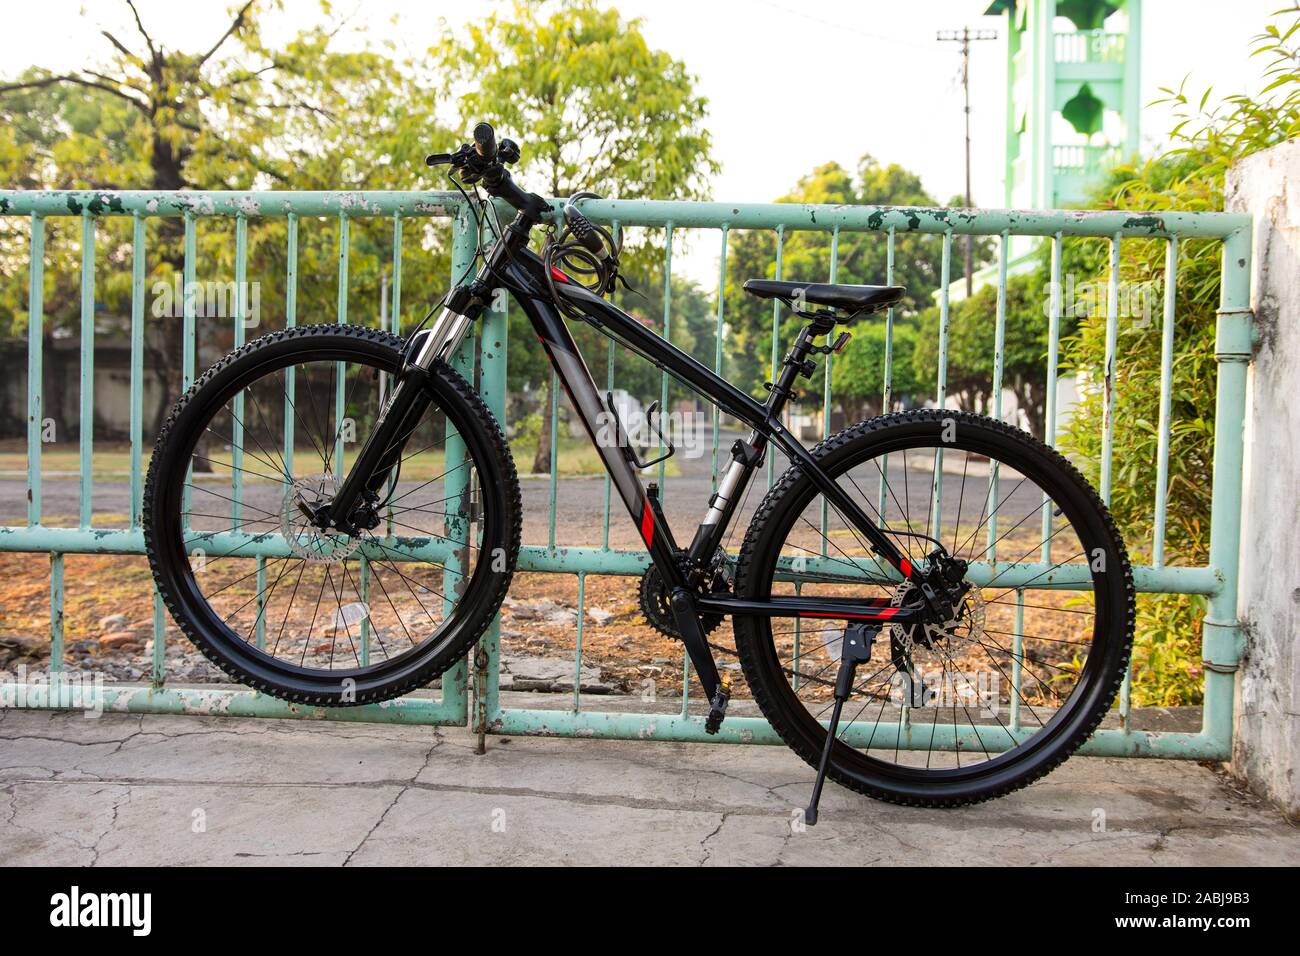 Bicycle Locked to a Fence-Security and Anti-Theft Stock Photo